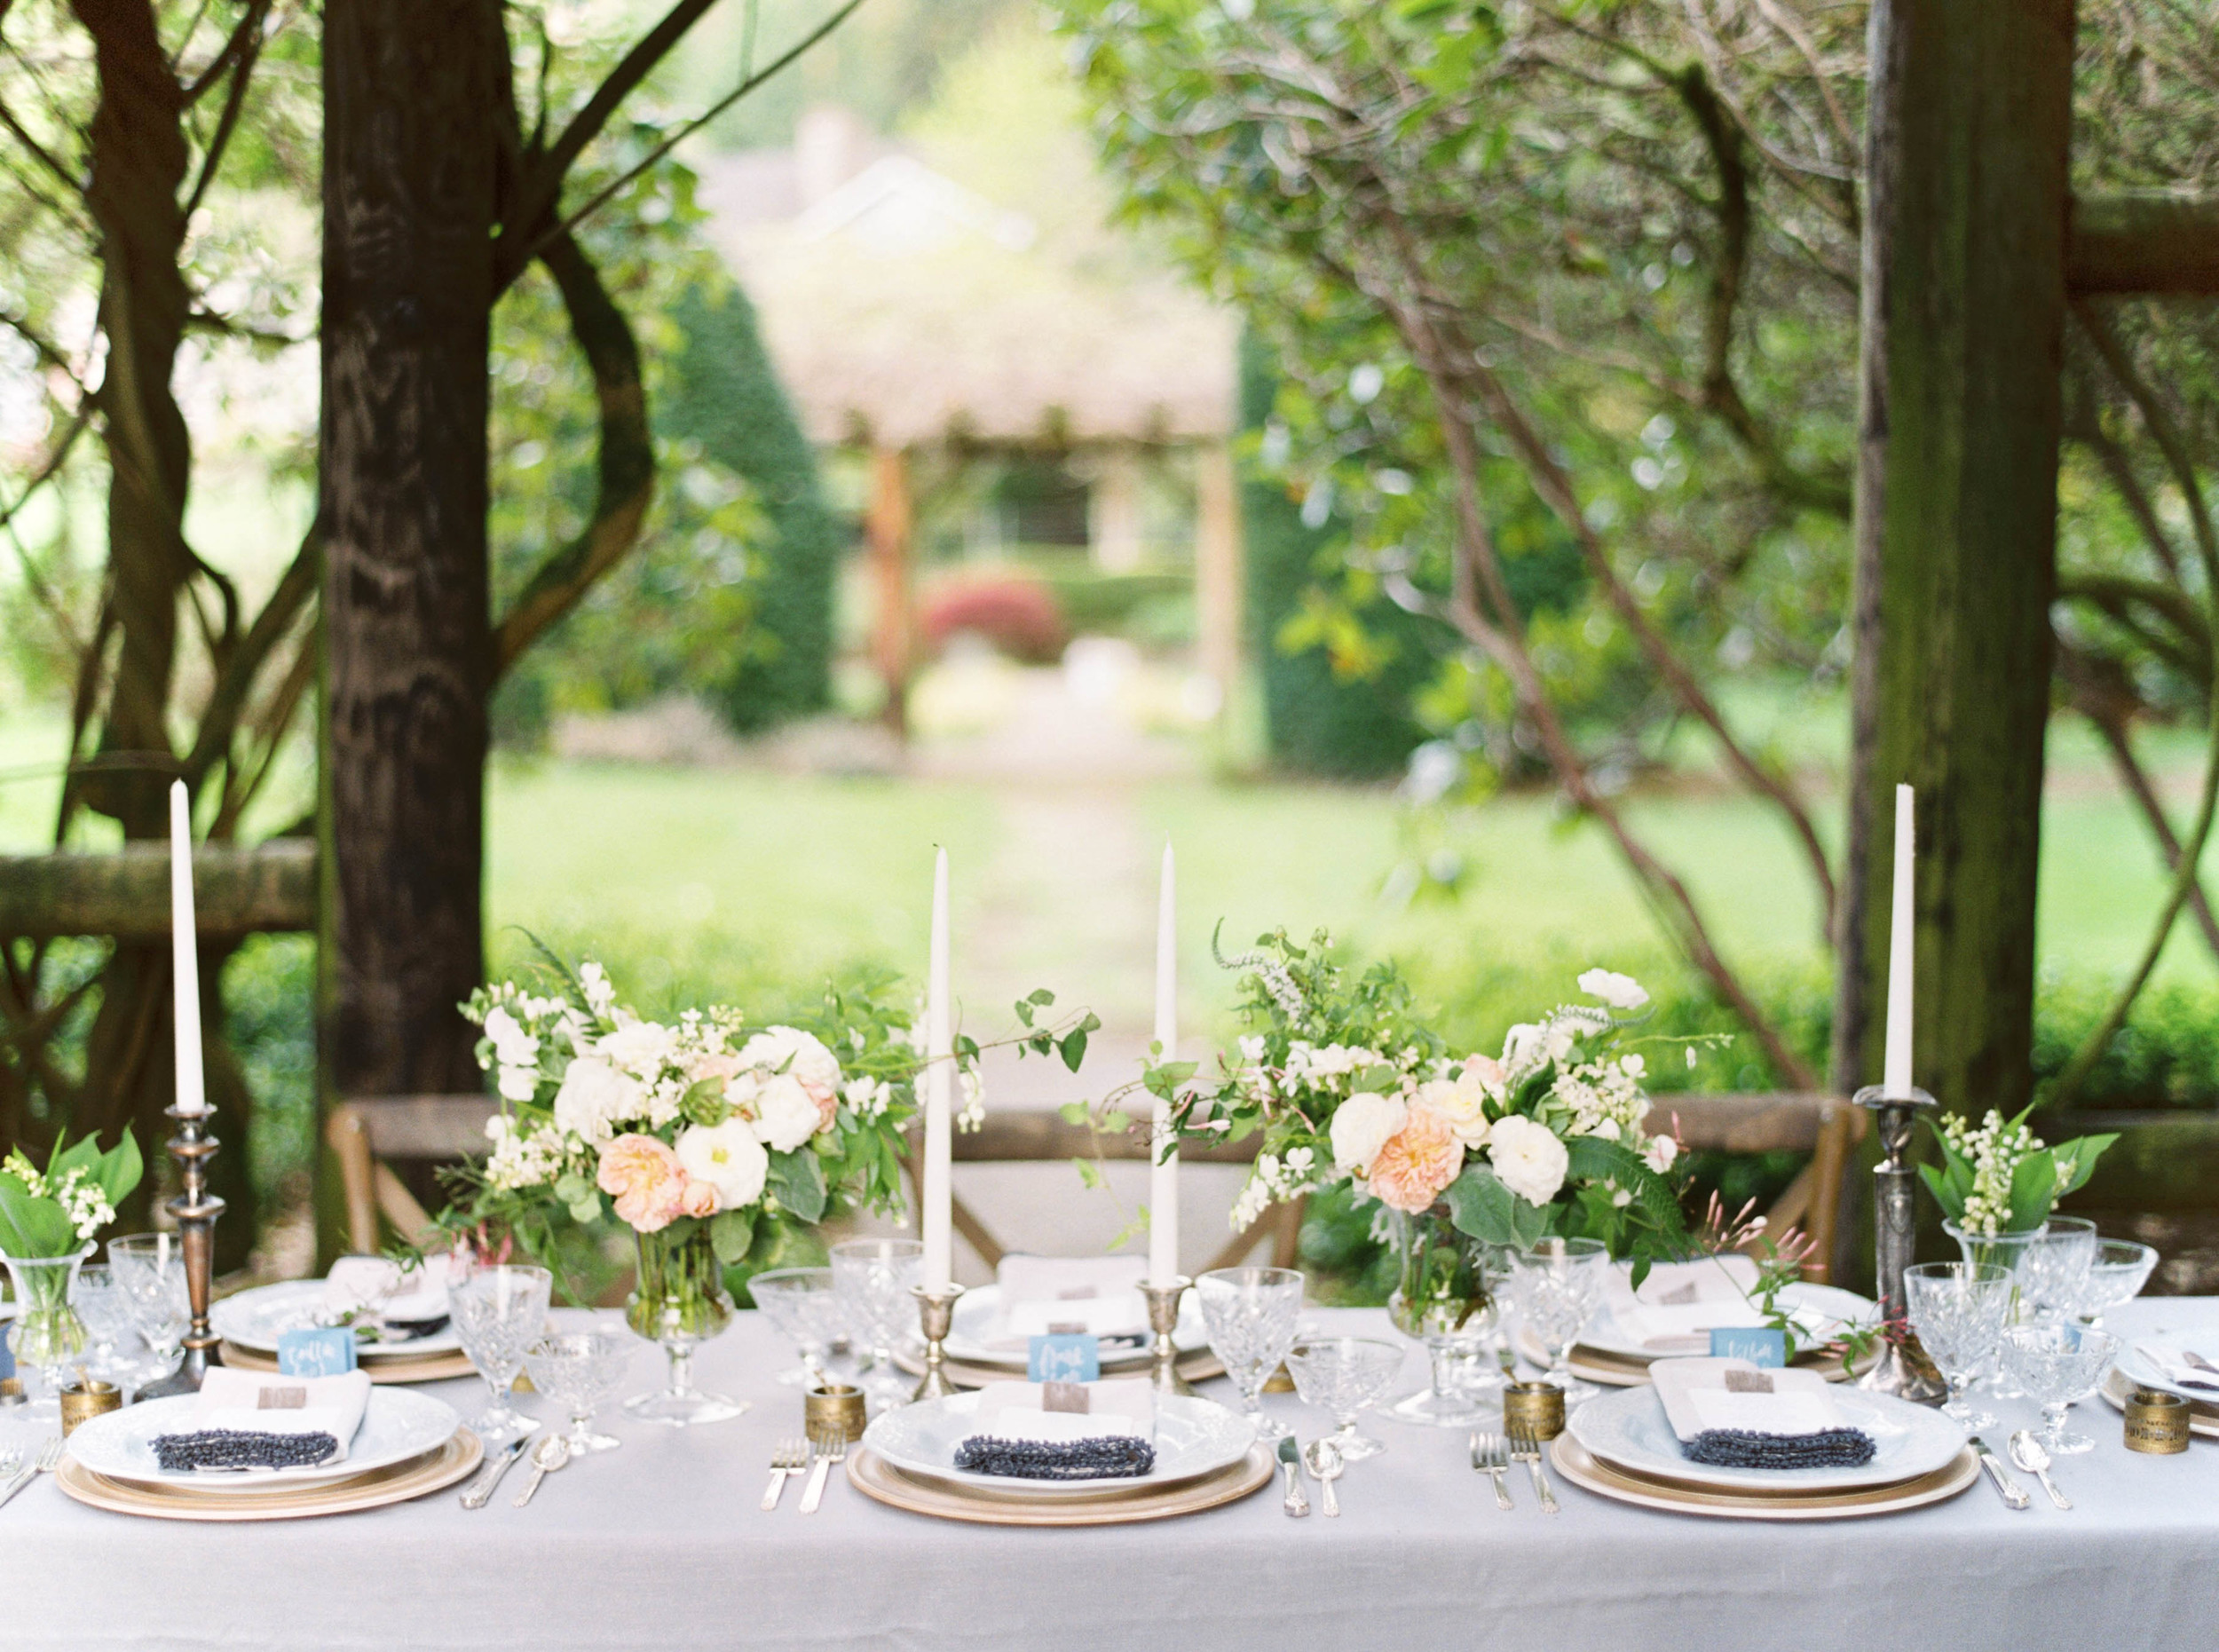  Outdoor Wedding Reception Tablescape Inspiration. The School of Styling - How to Style a Beautiful Table. Photo by Maria Lamb. http://www.theschoolofstyling.com 